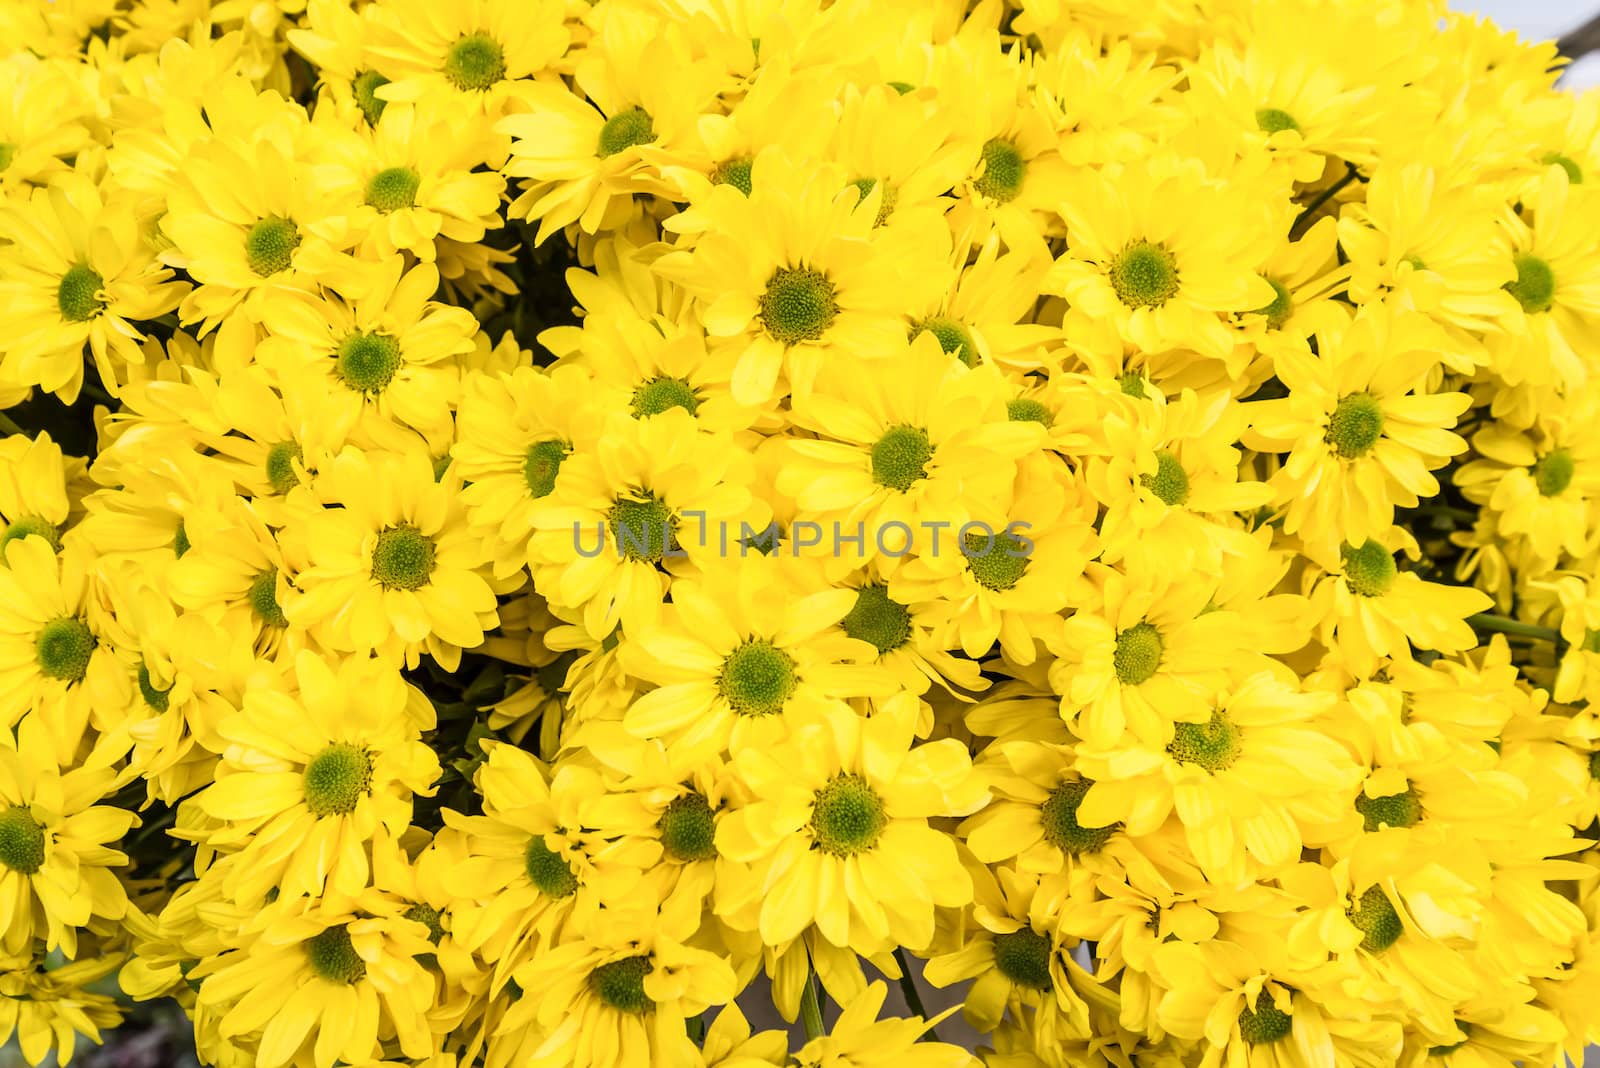 Yellow chrysanthemums as natural background by wmitrmatr